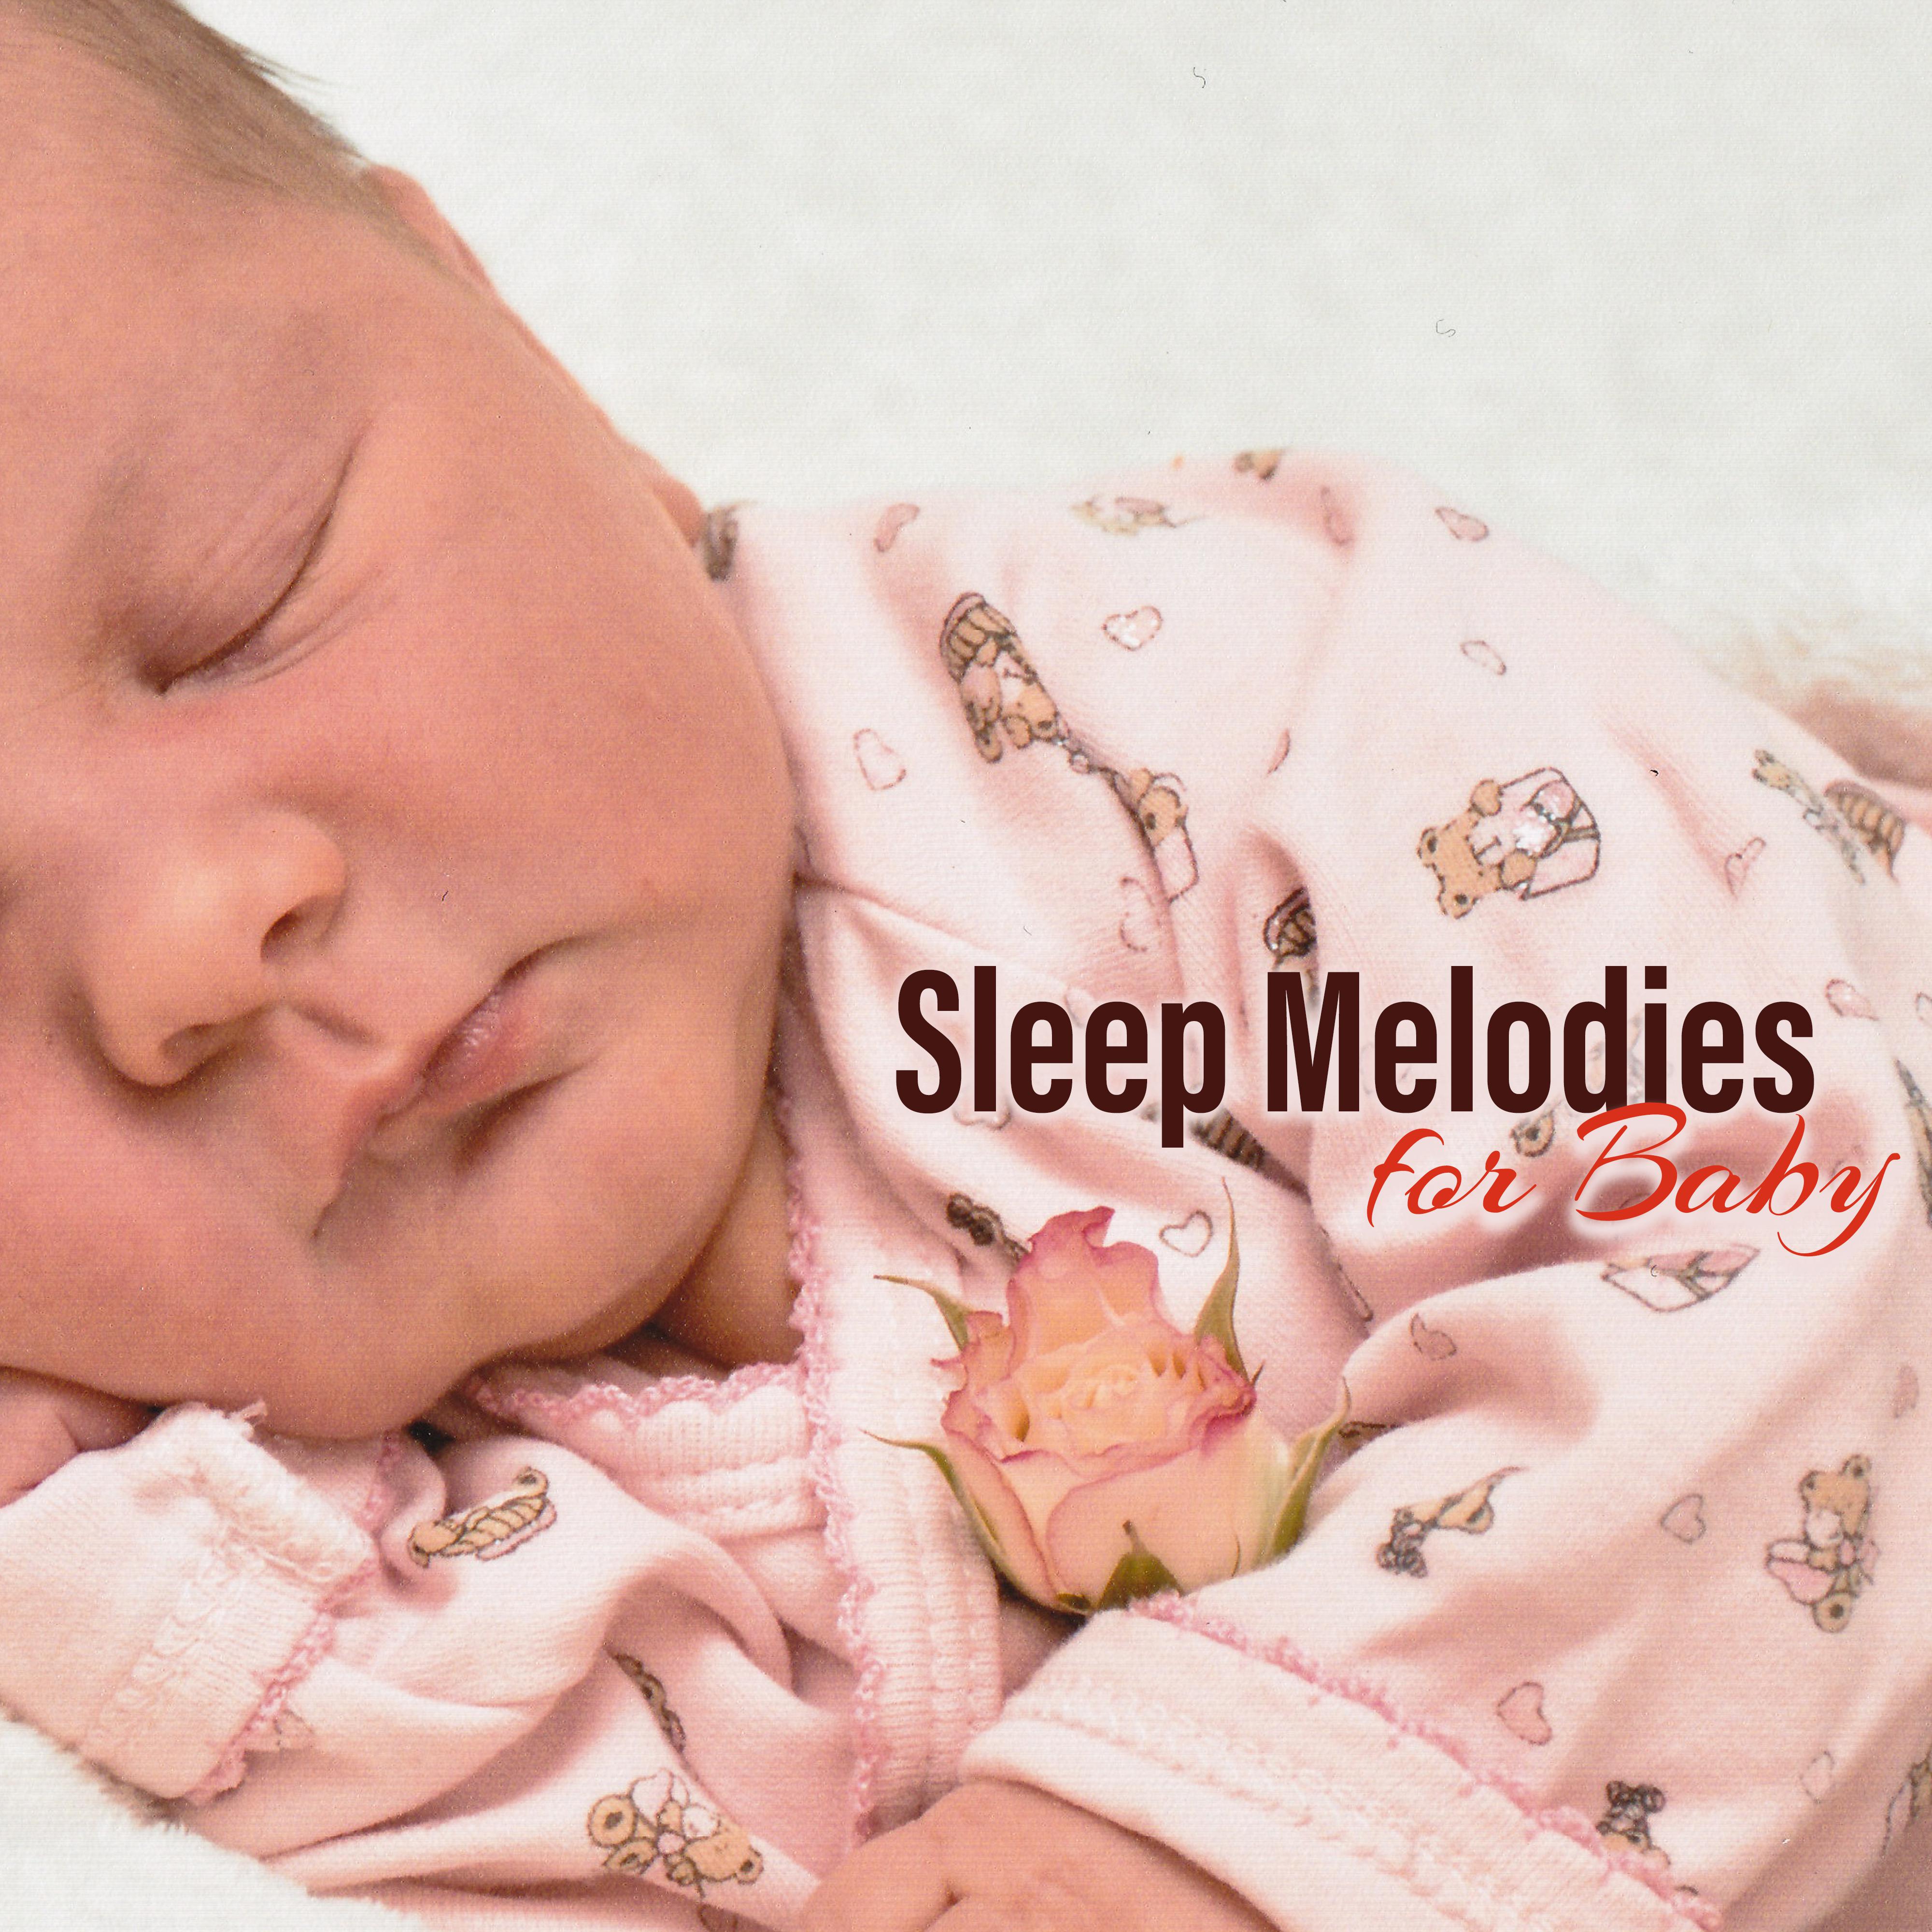 Sleep Melodies for Baby